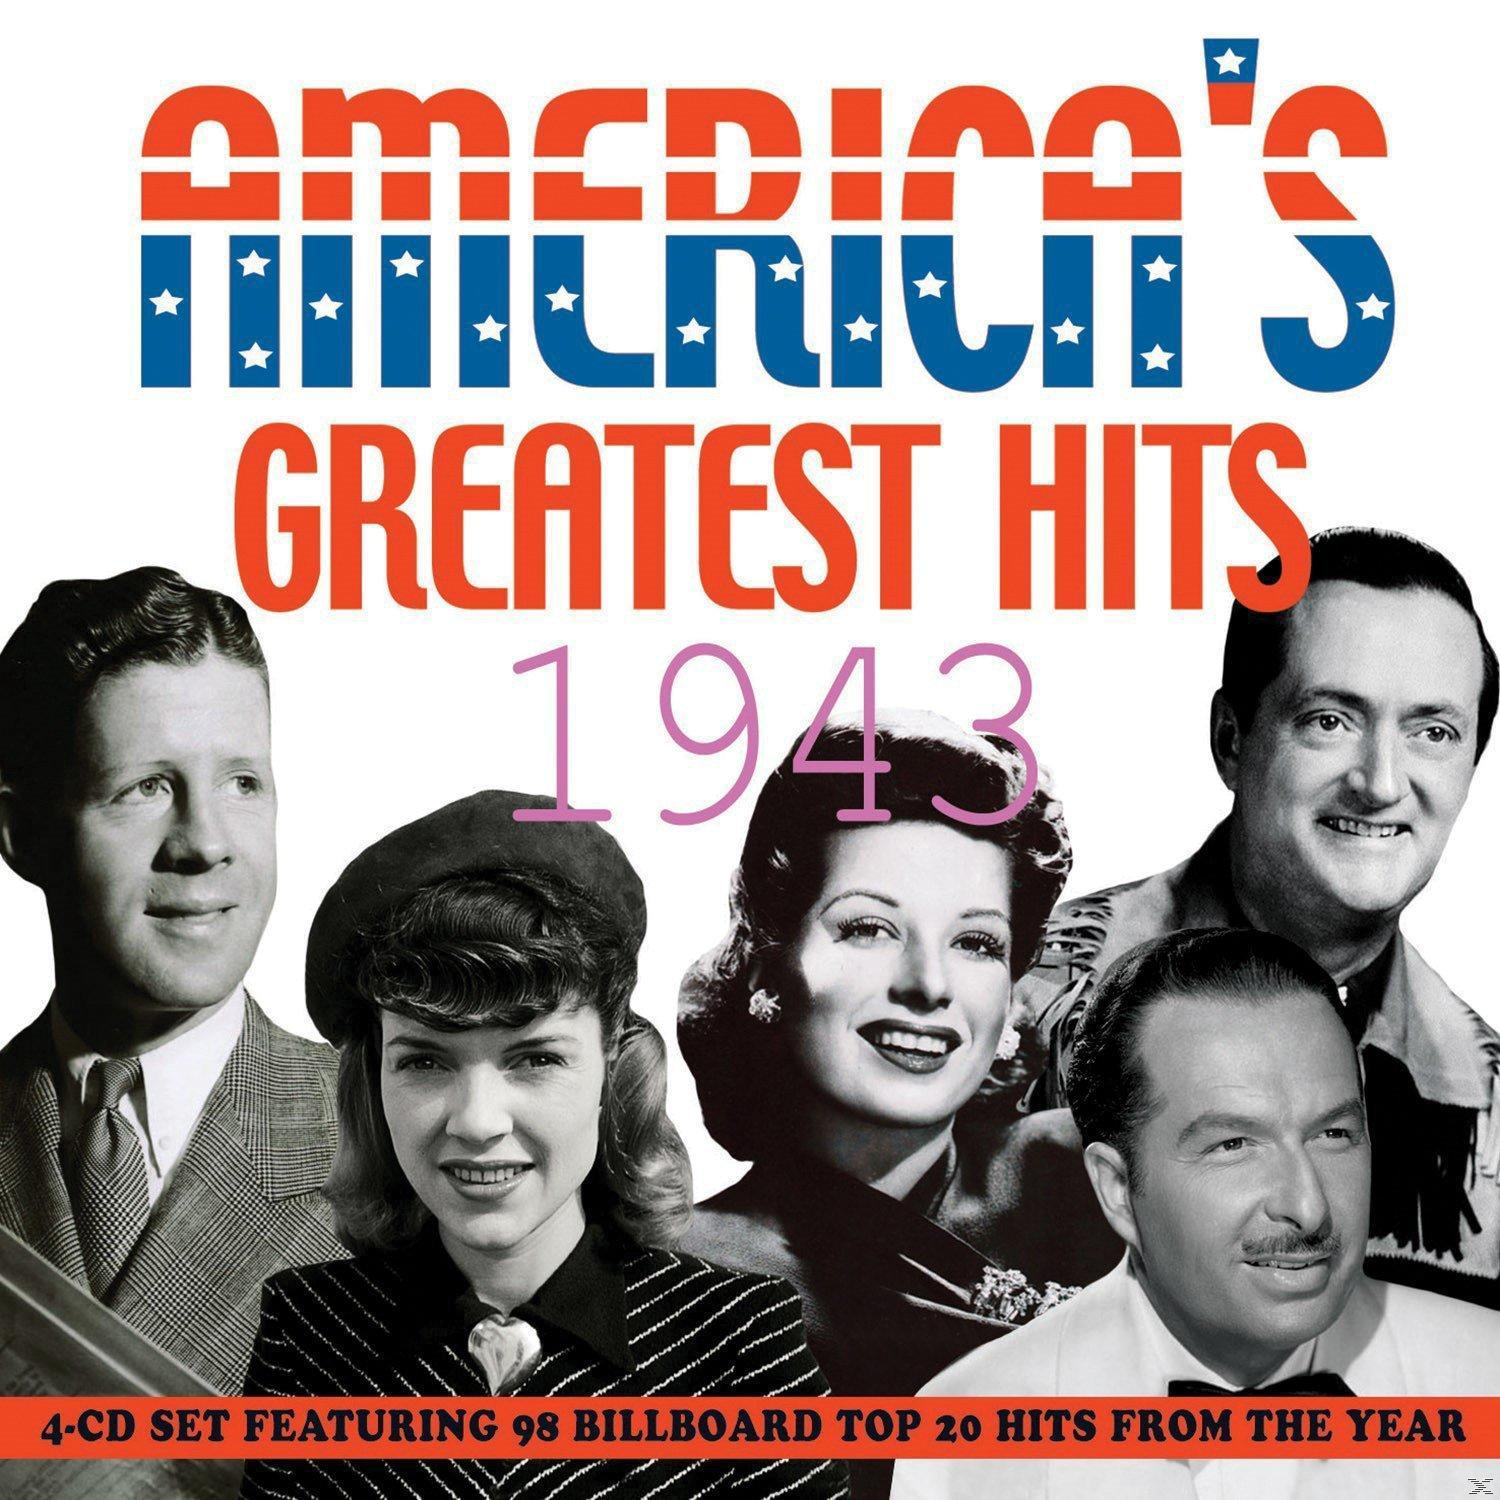 America\'s VARIOUS (CD) - - 1943 Greatest Hits